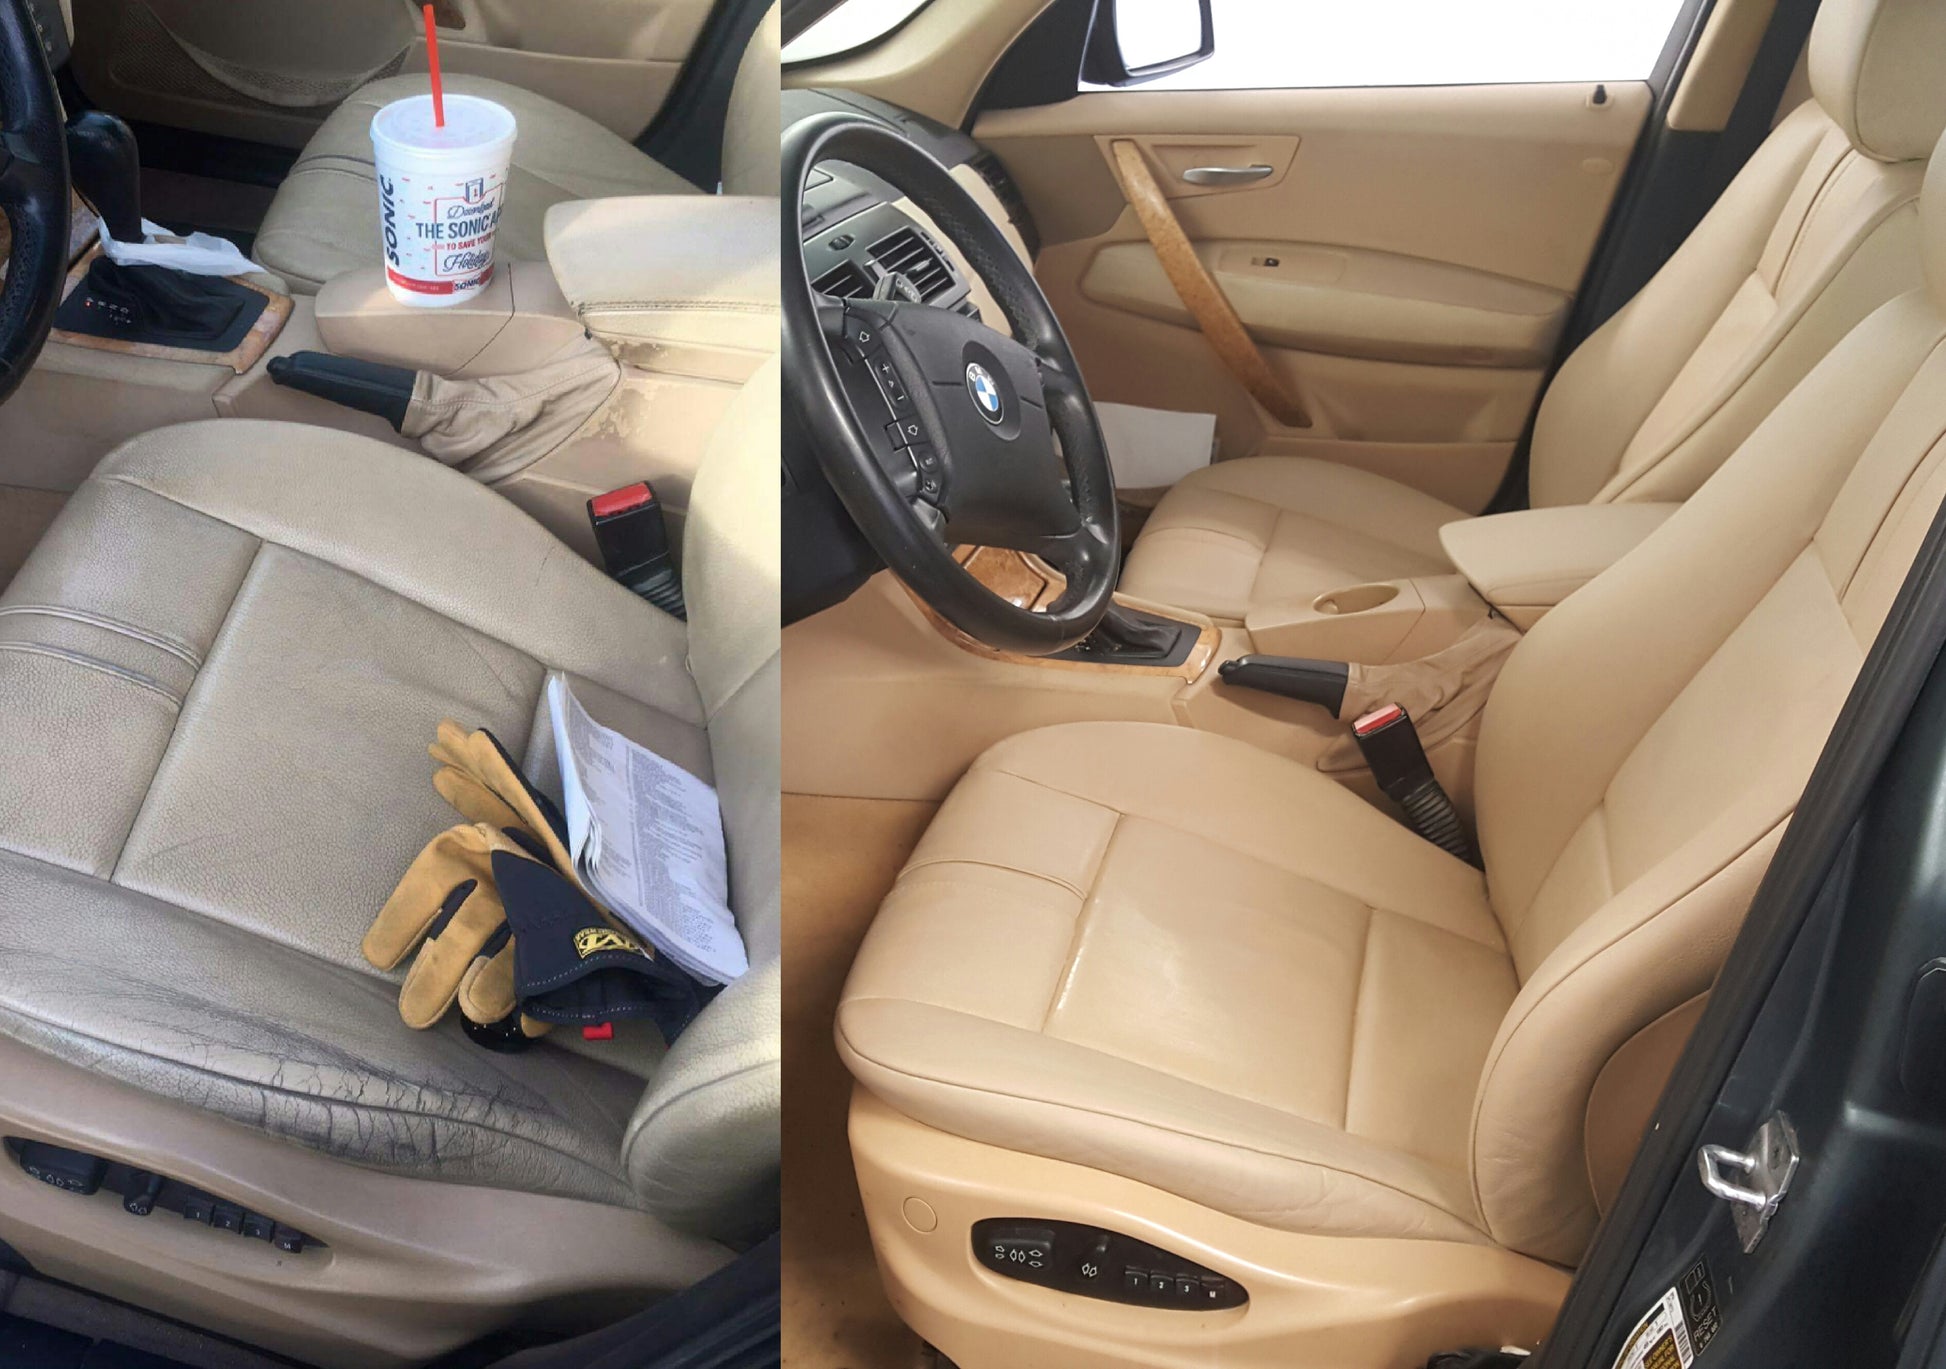 How to clean your car's vinyl, rubber and leather interiors